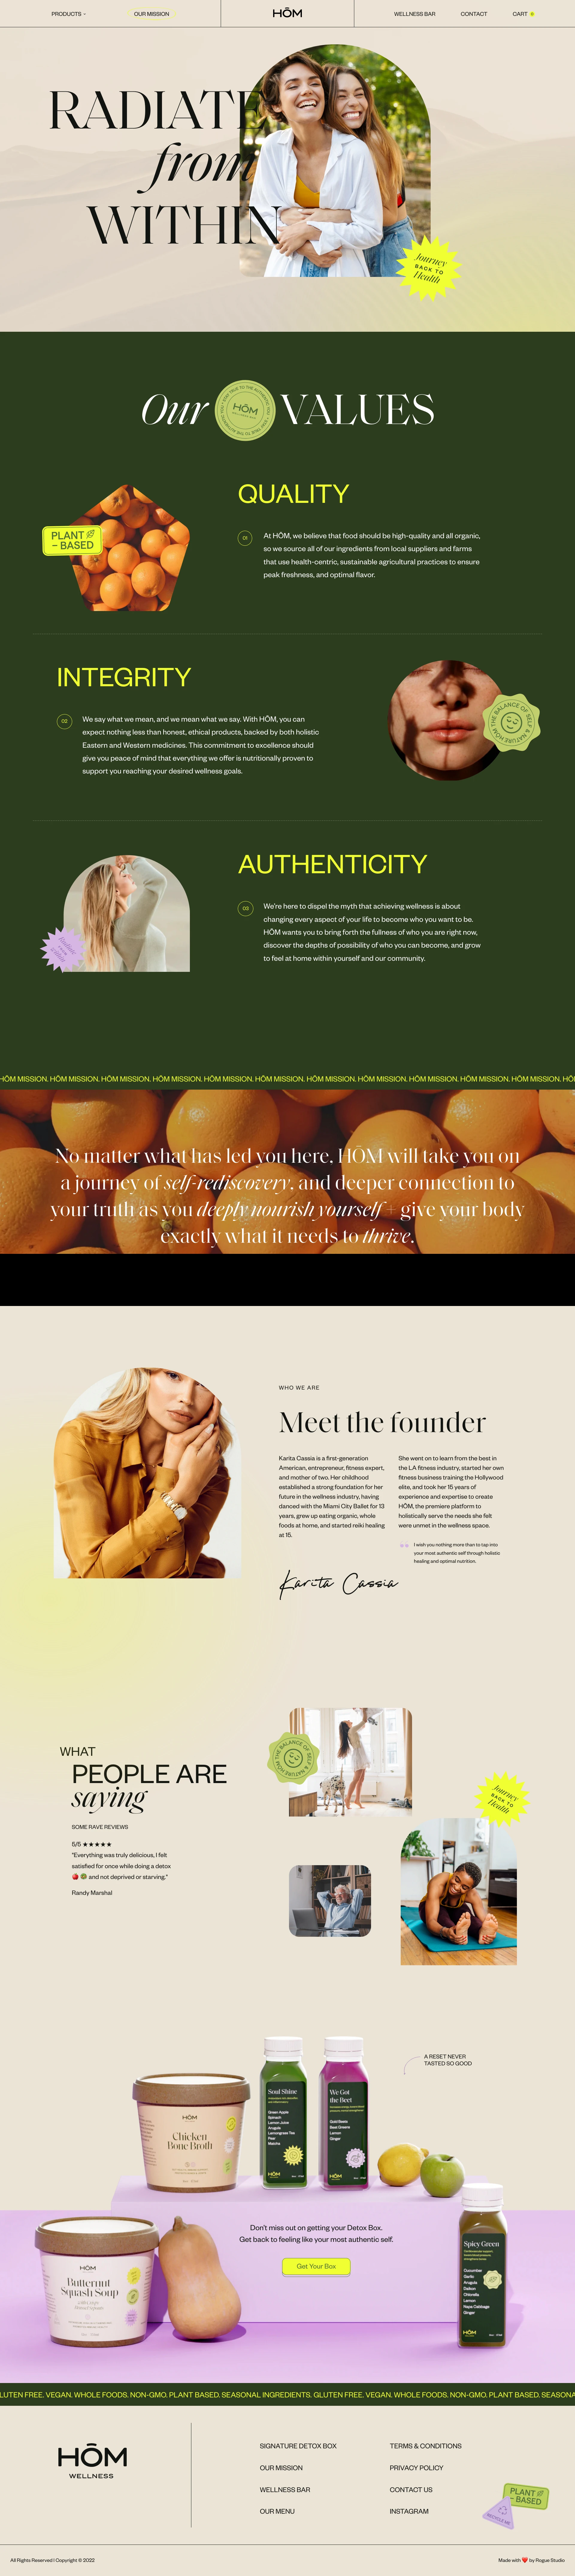 HŌM Wellness Landing Page Example: At HŌM, we believe that food should be high-quality and all organic, so we source all of our ingredients from local suppliers and farms that use health-centric, sustainable agricultural practices to ensure peak freshness, and optimal flavor.